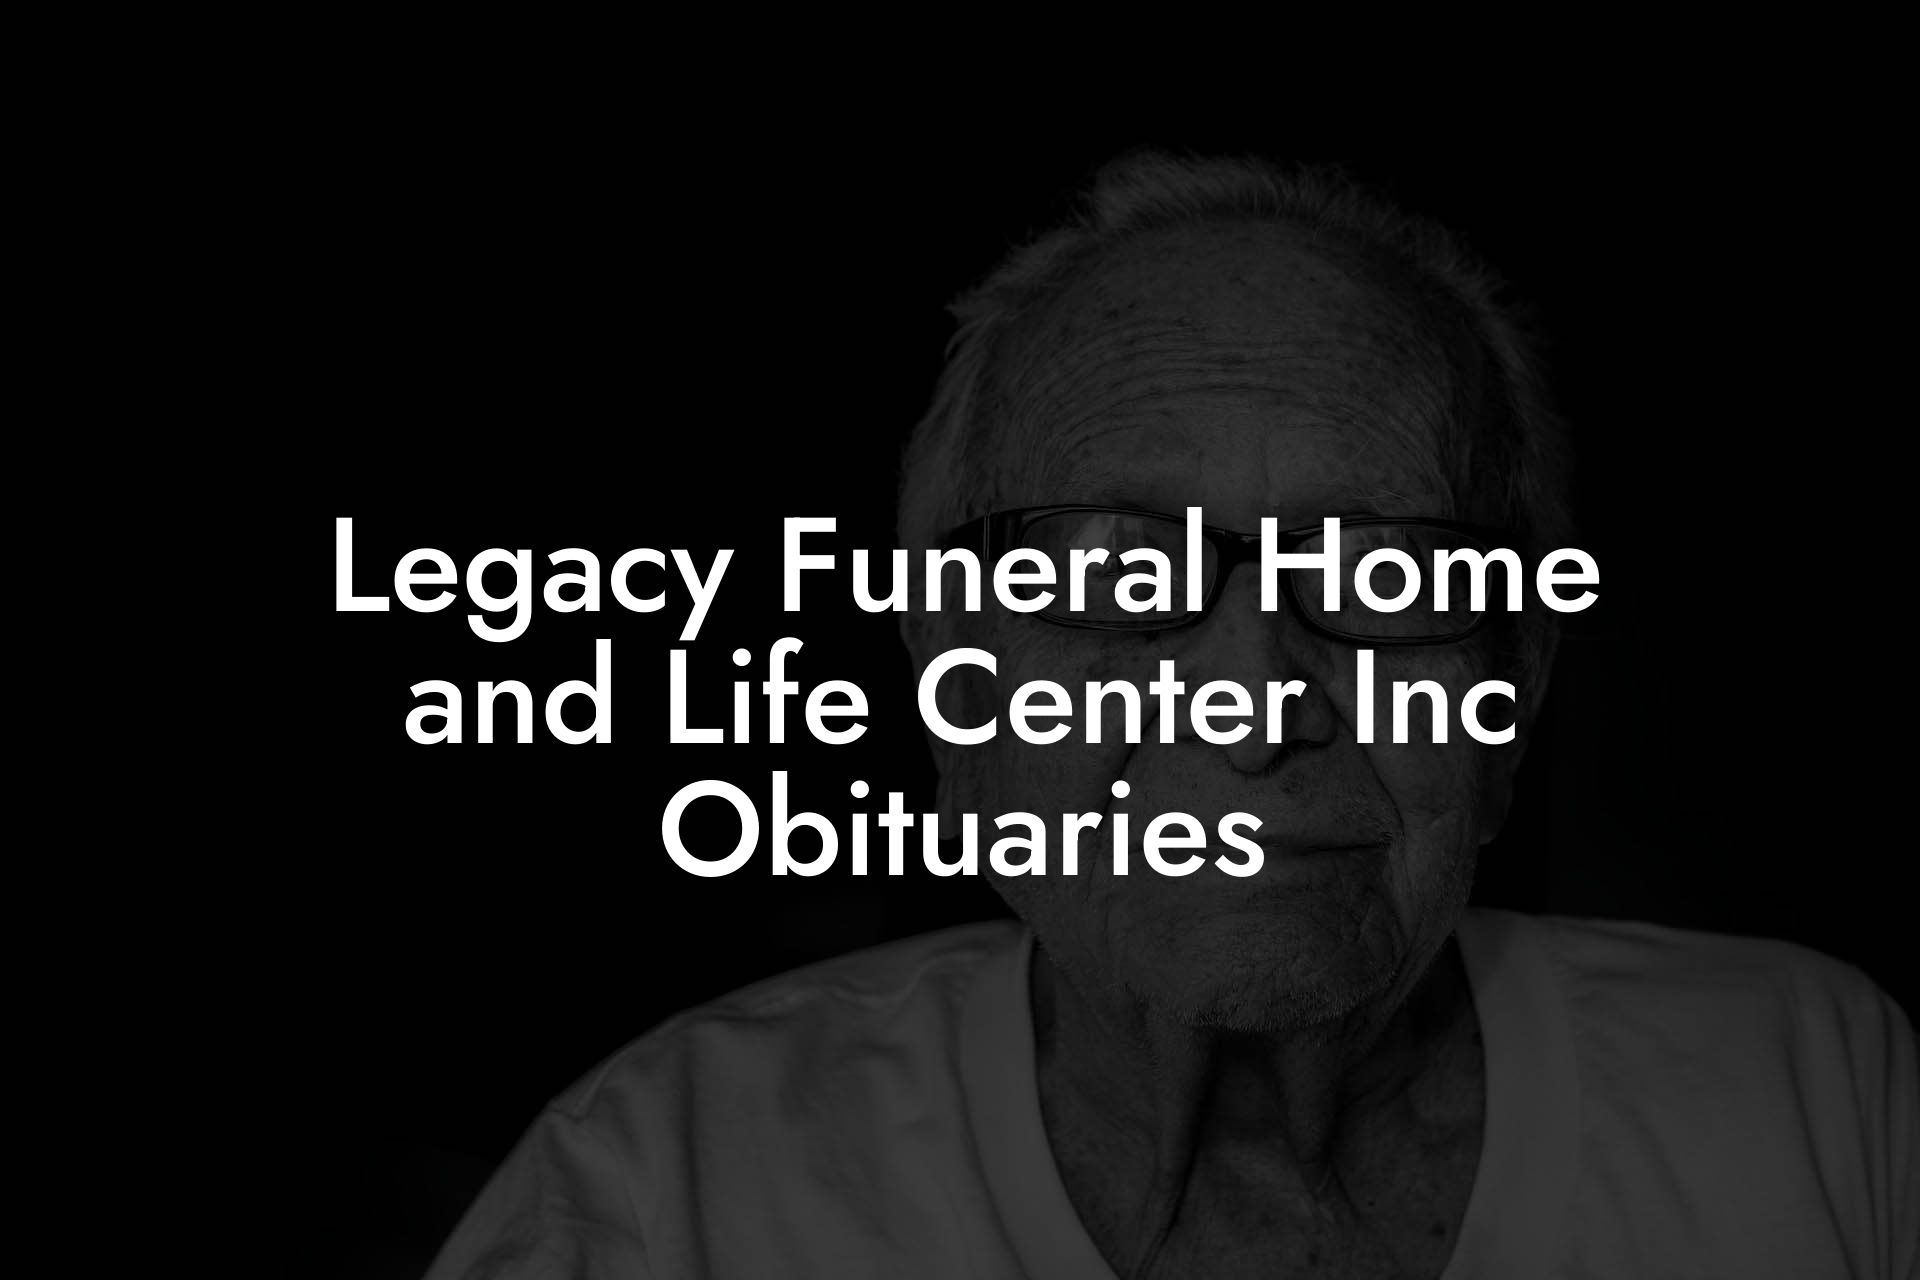 Legacy Funeral Home and Life Center Inc Obituaries